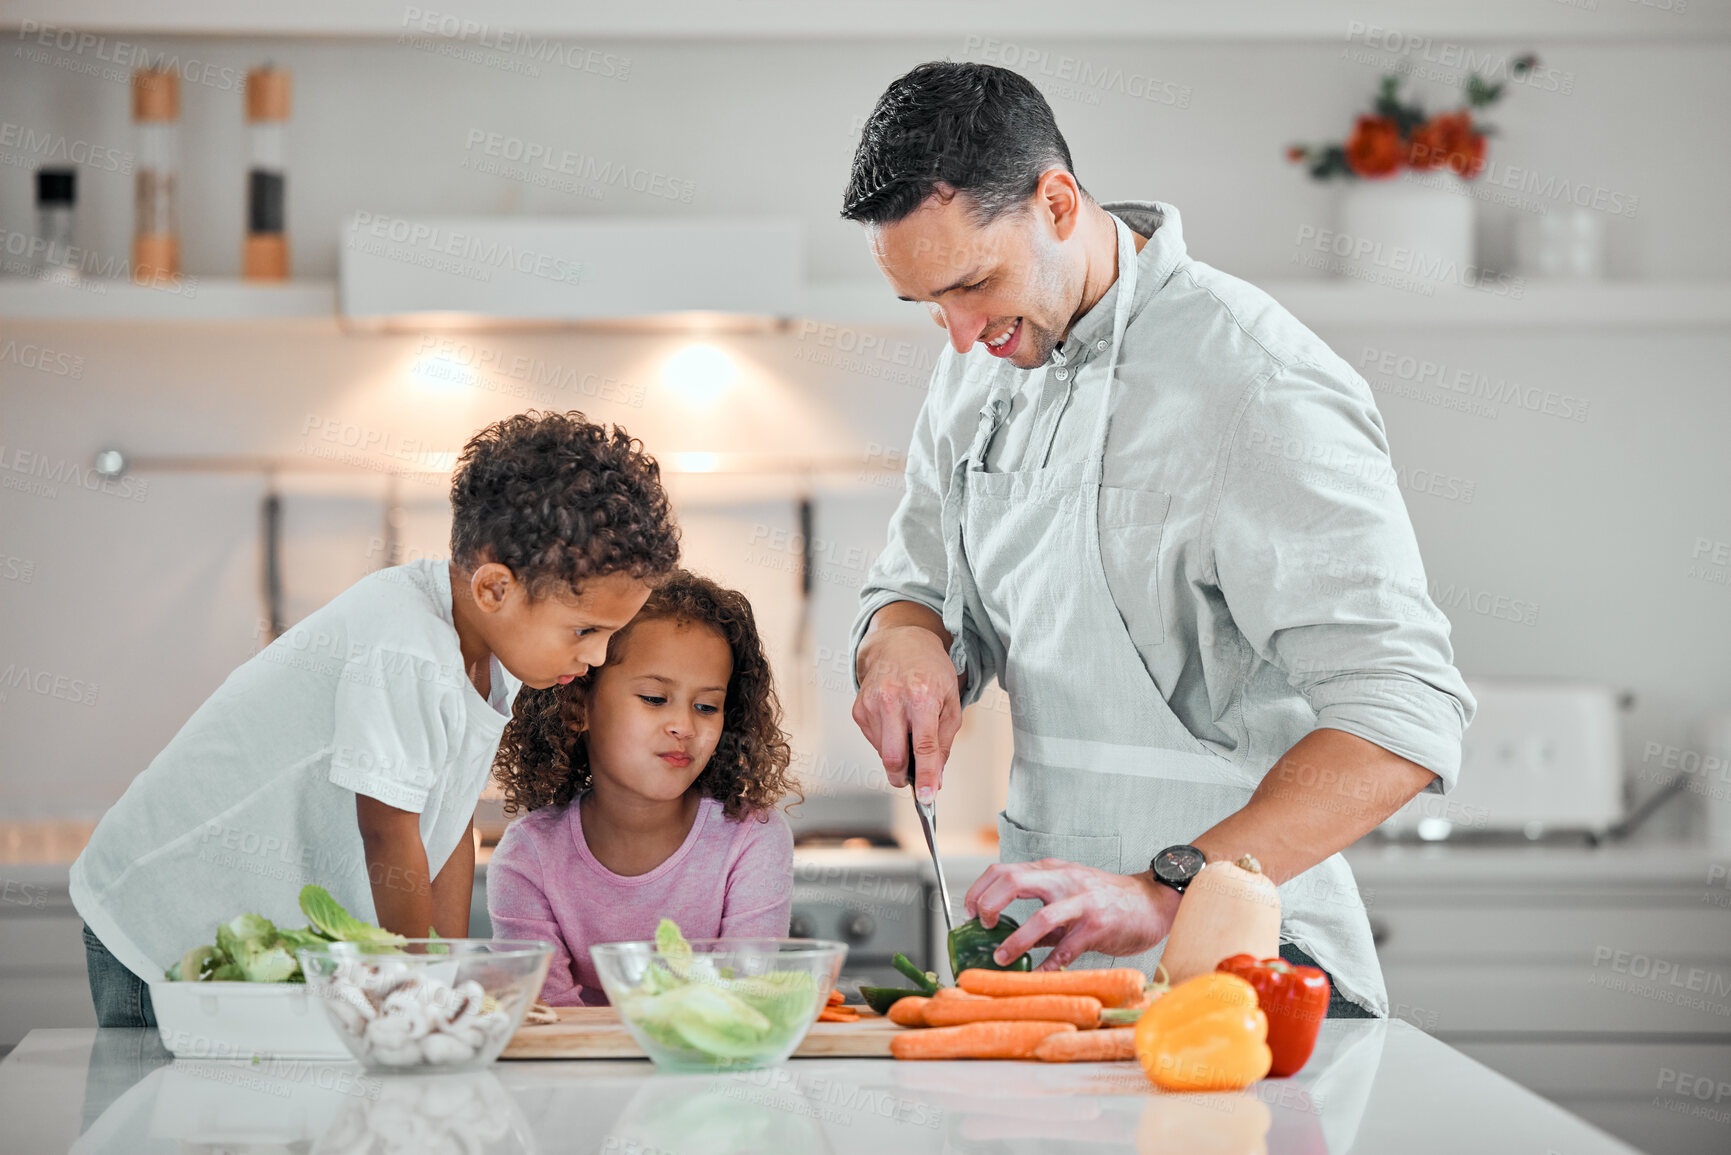 Buy stock photo Cooking, help and meal prep with family in kitchen for health, nutrition and food. Diet, support and dinner with man and children cutting vegetables at home for wellness, organic salad and learning